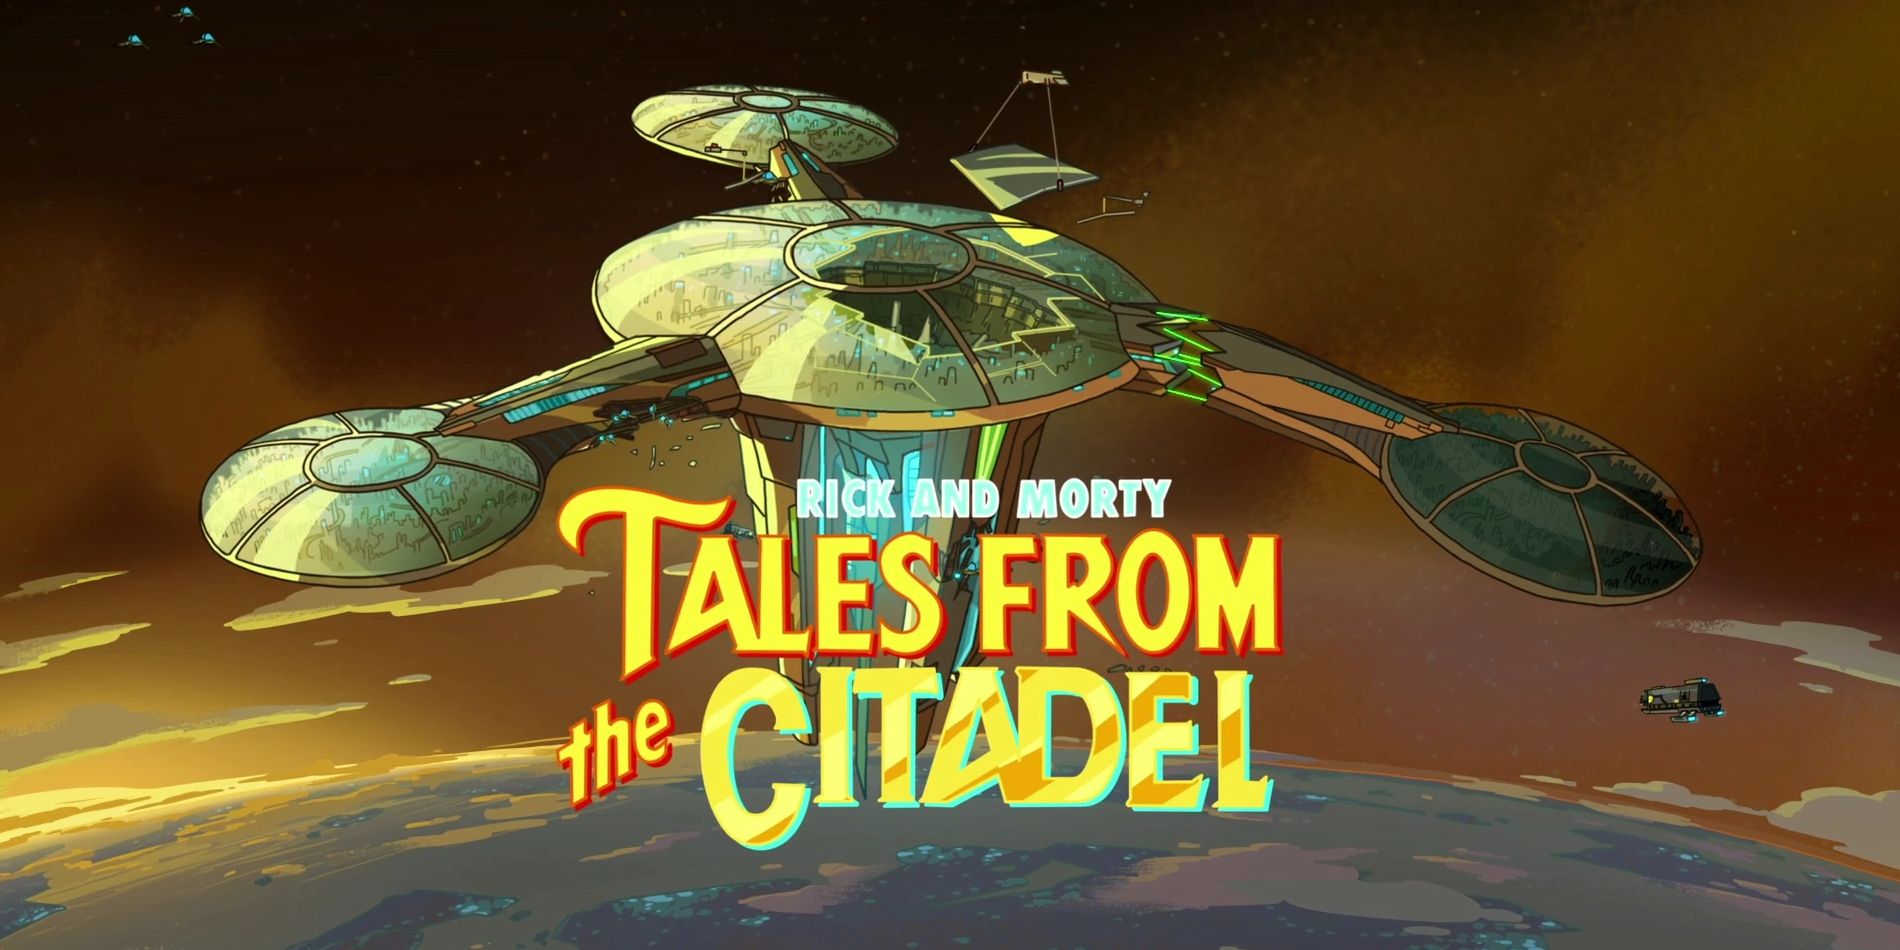 Rick and Morty Tales From The Citadel